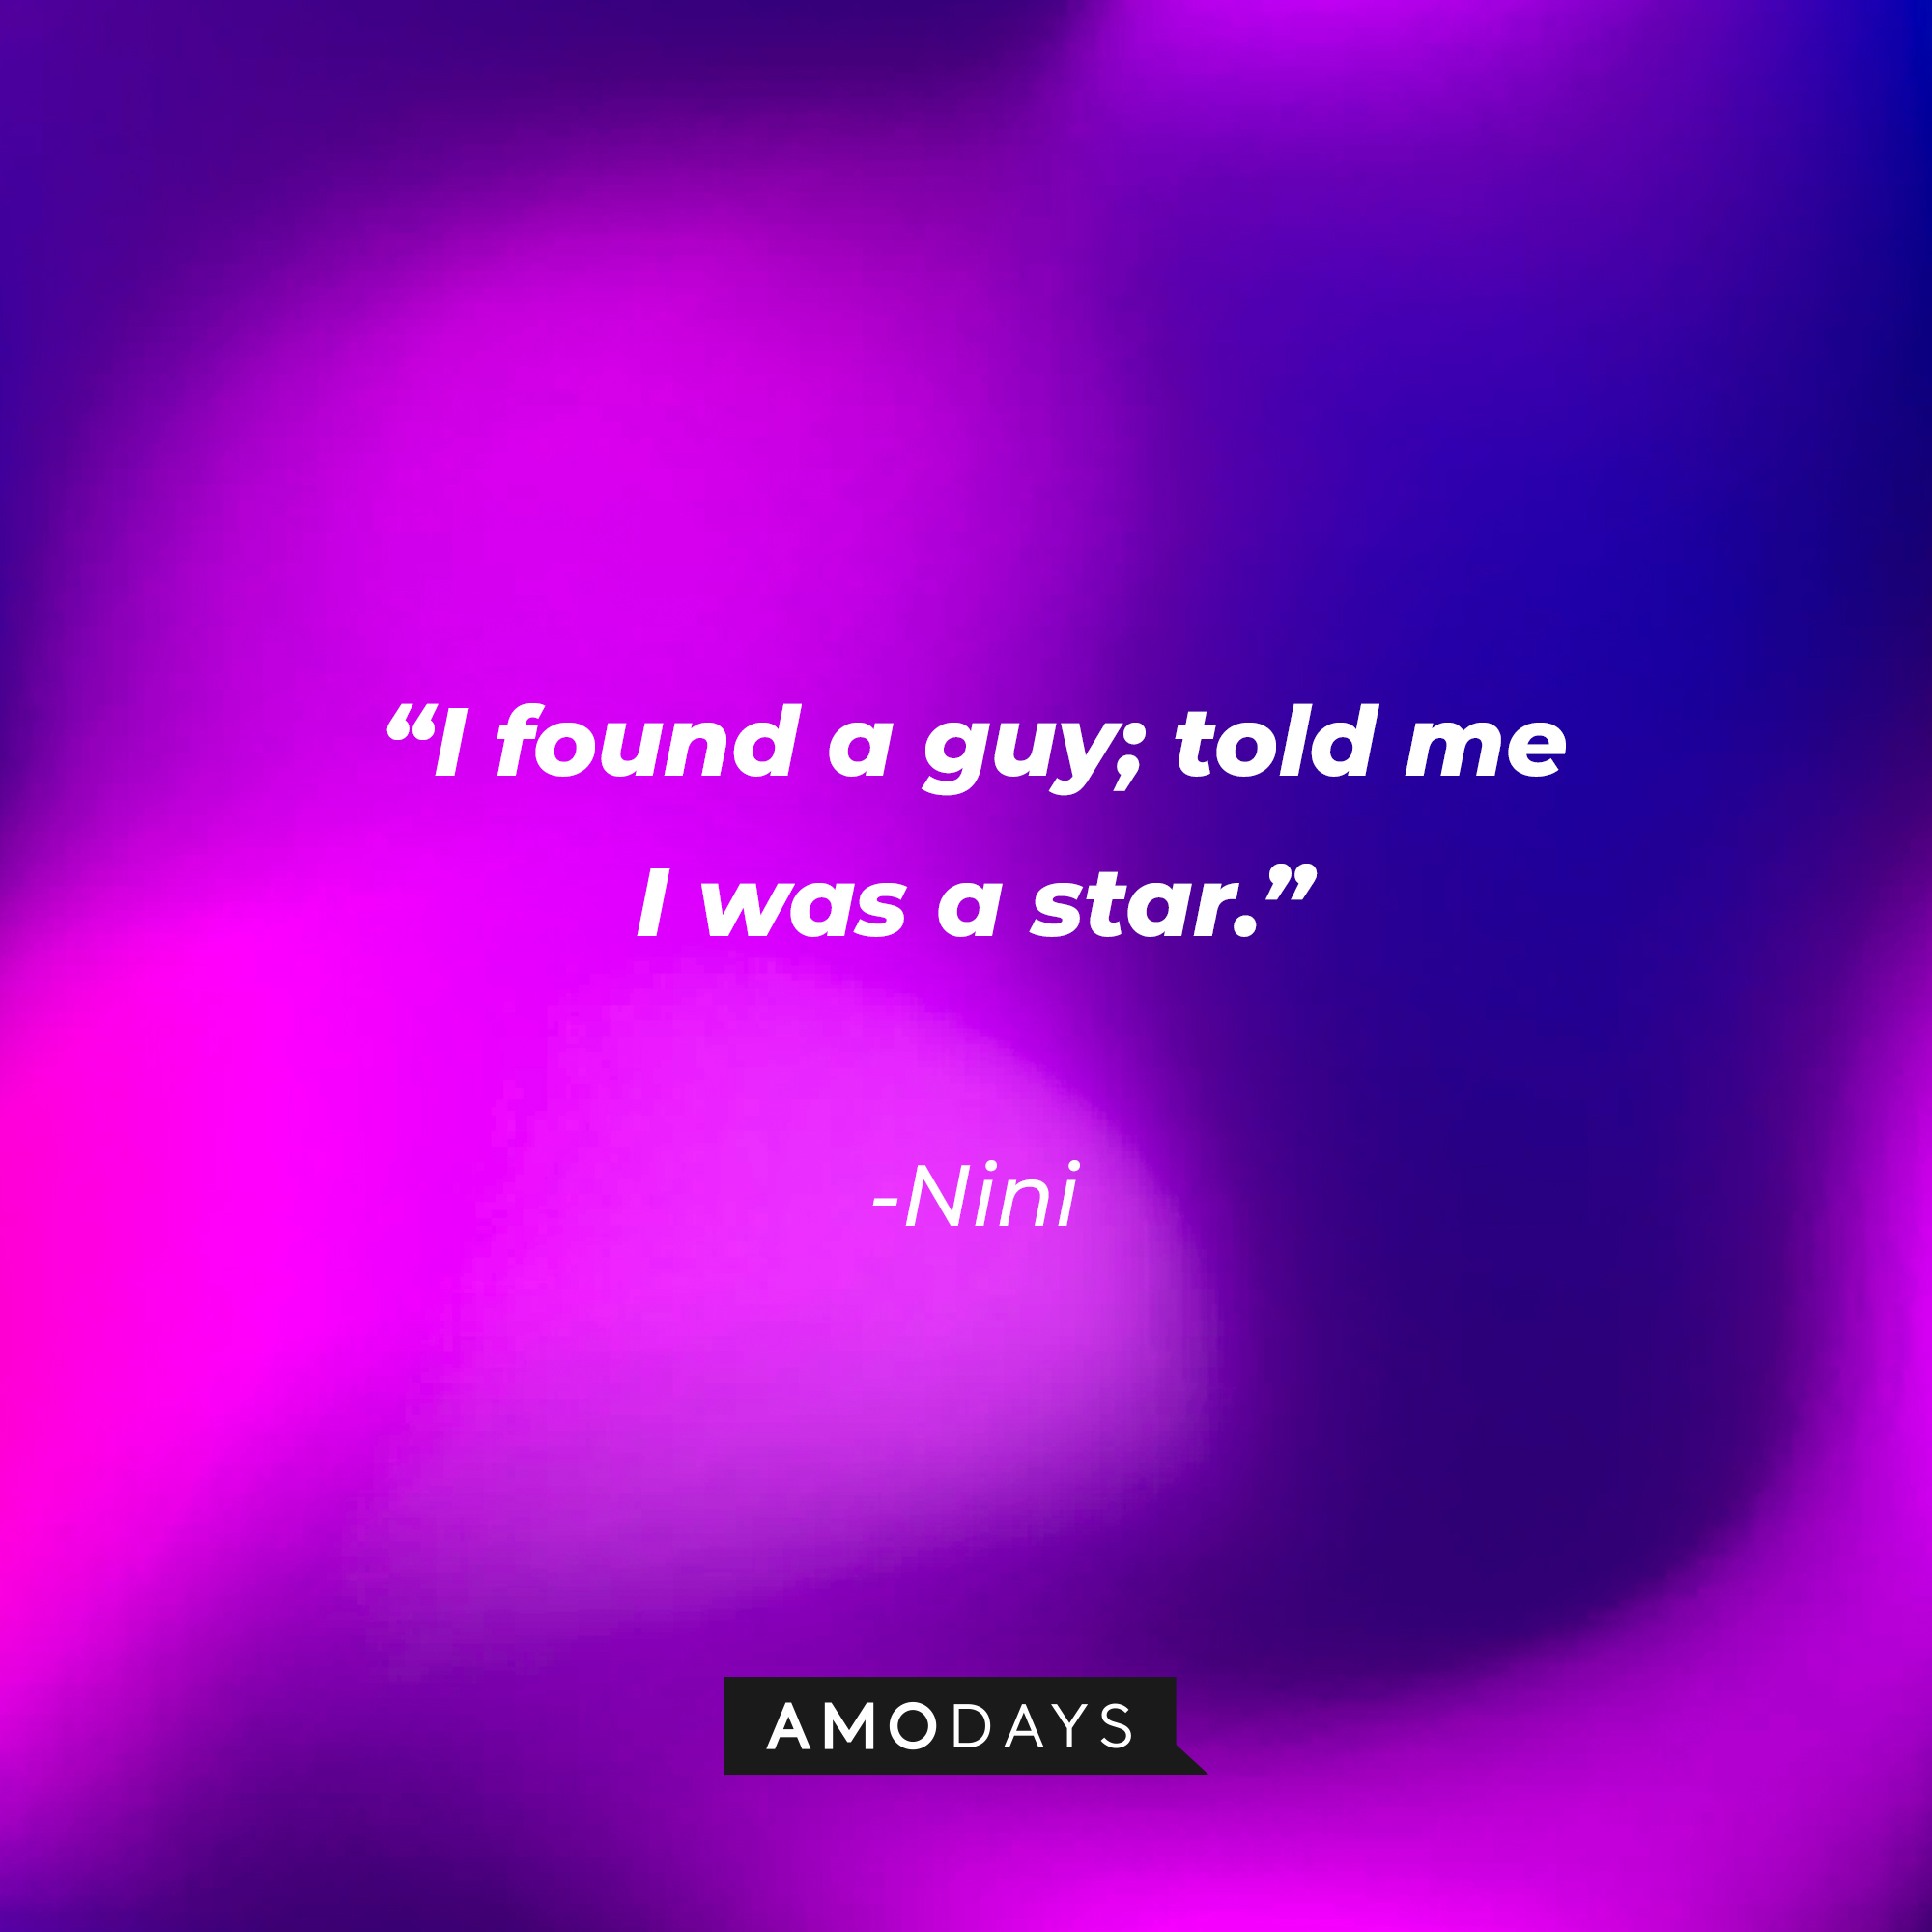 Nini’s quote: "I found a guy, told me I was a star." | Source: AmoDays